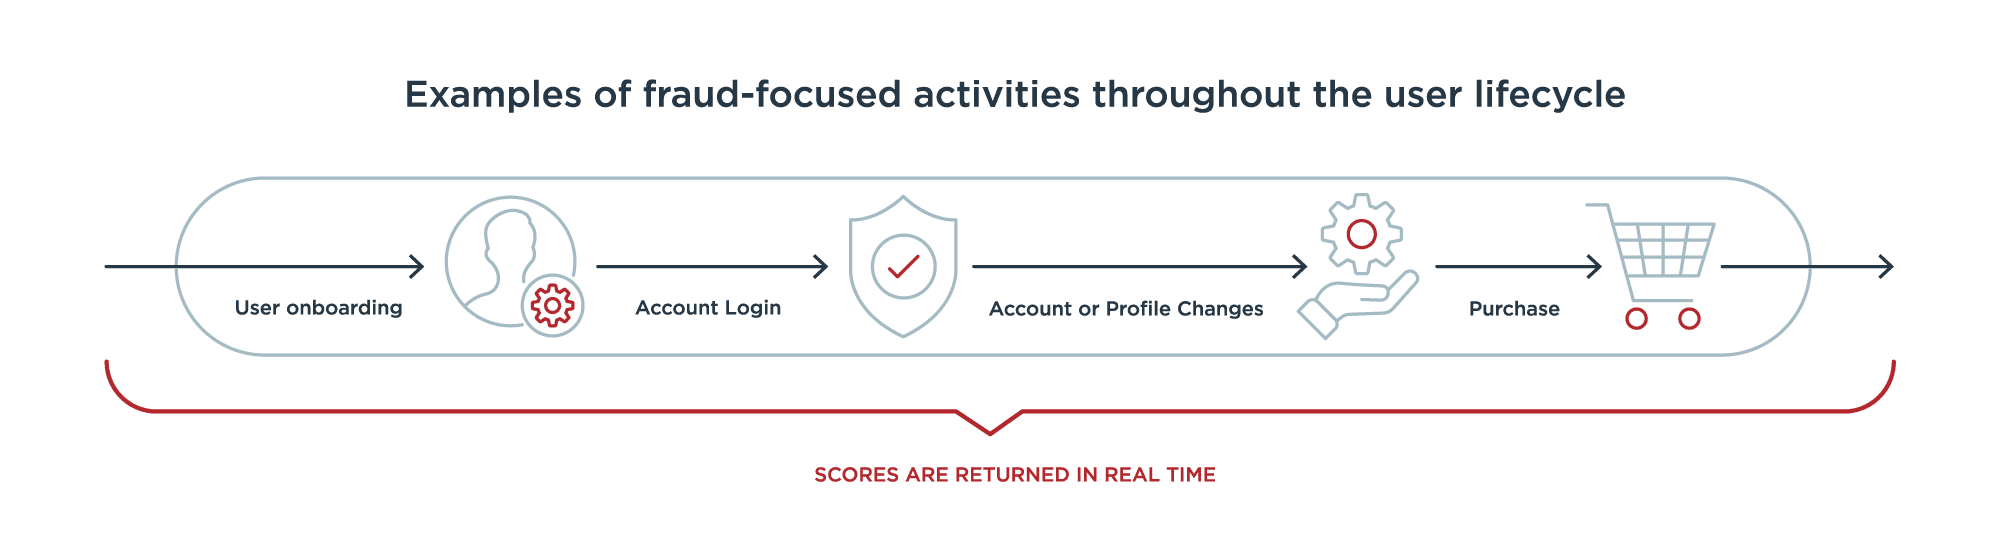 Examples of fraud-focused activities throughout the user lifecycle